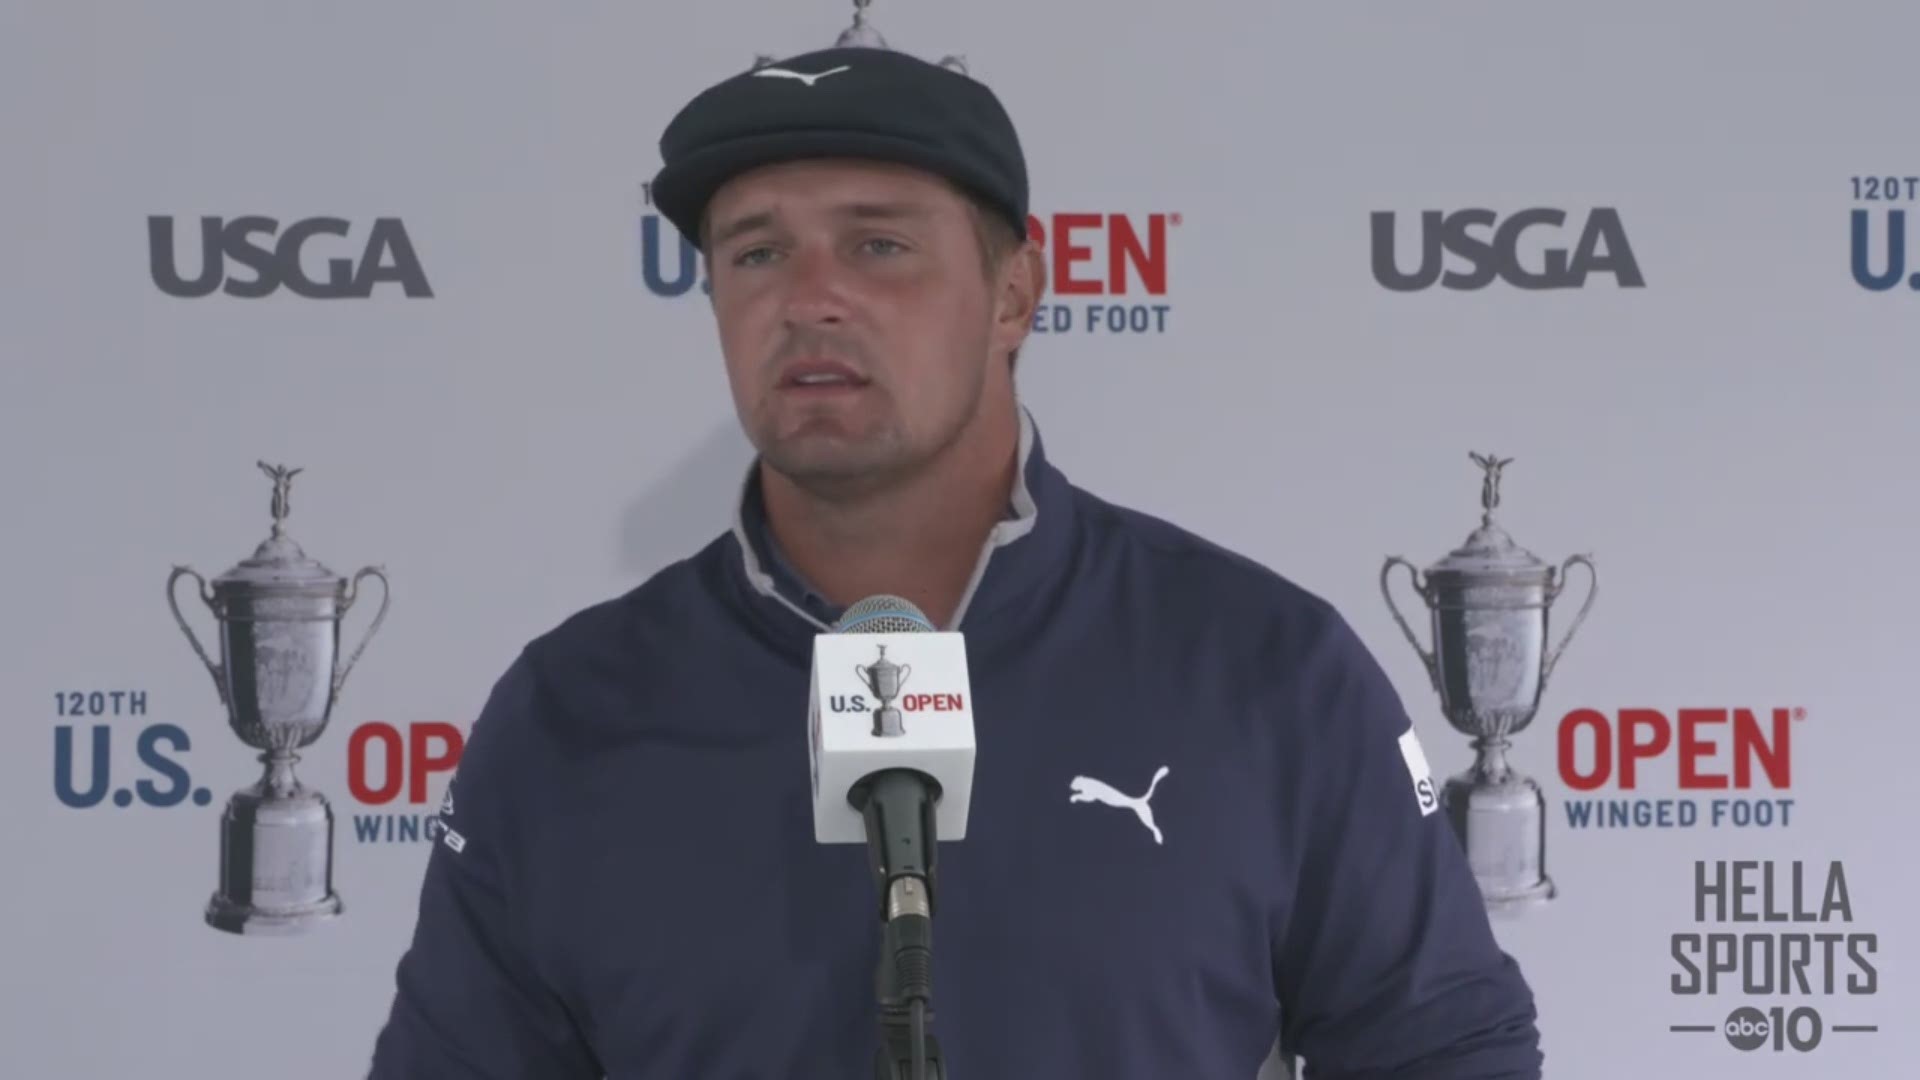 Modesto native Bryson DeChambeau discusses his round of 68 to put him in sole possession of second place heading into the weekend at the 120th U.S. Open.